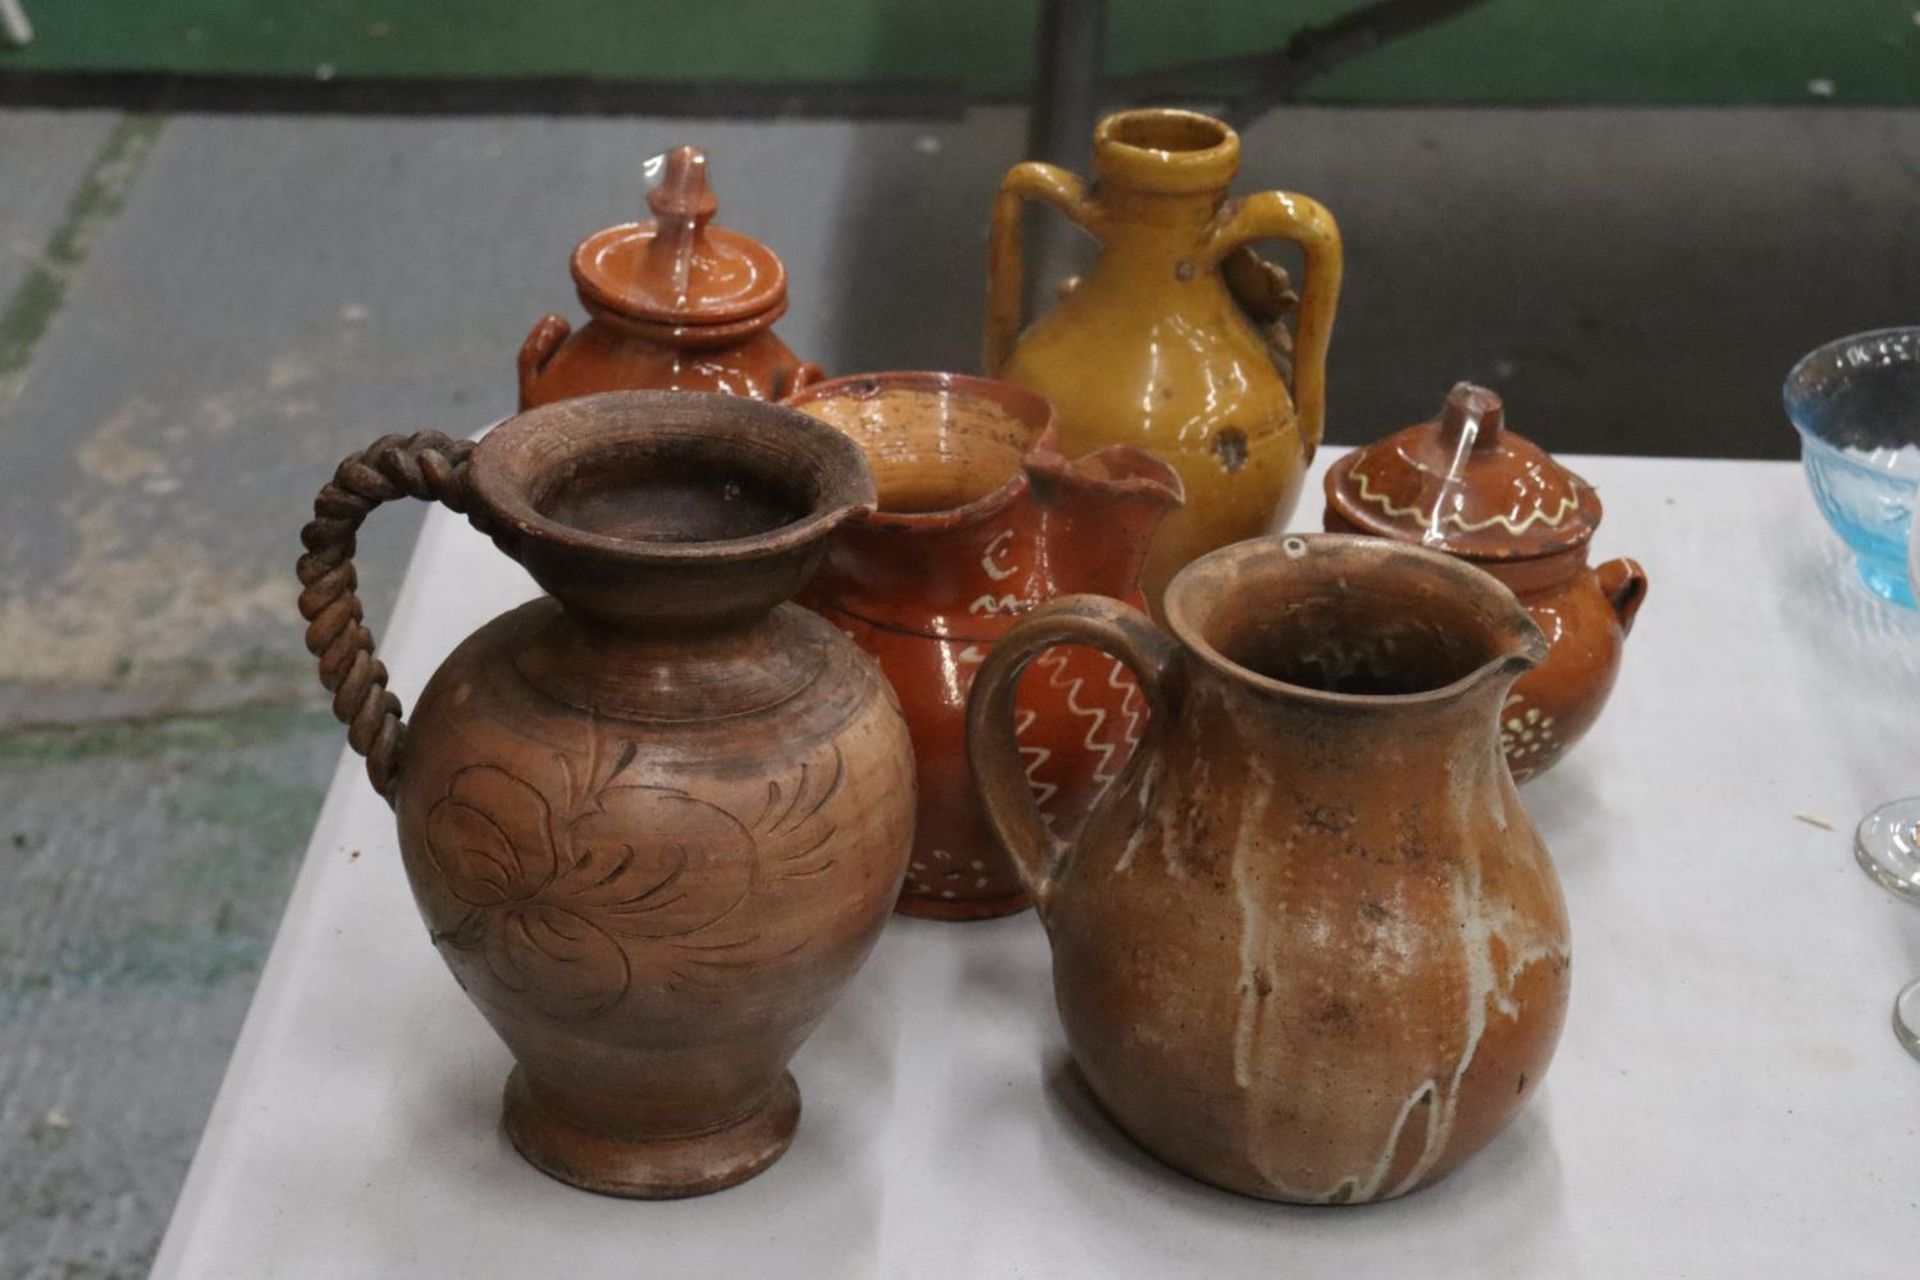 SIX STONEWARE ITEMS TO INCLUDE JUGS, EWER AND LIDDED POTS - Image 10 of 10